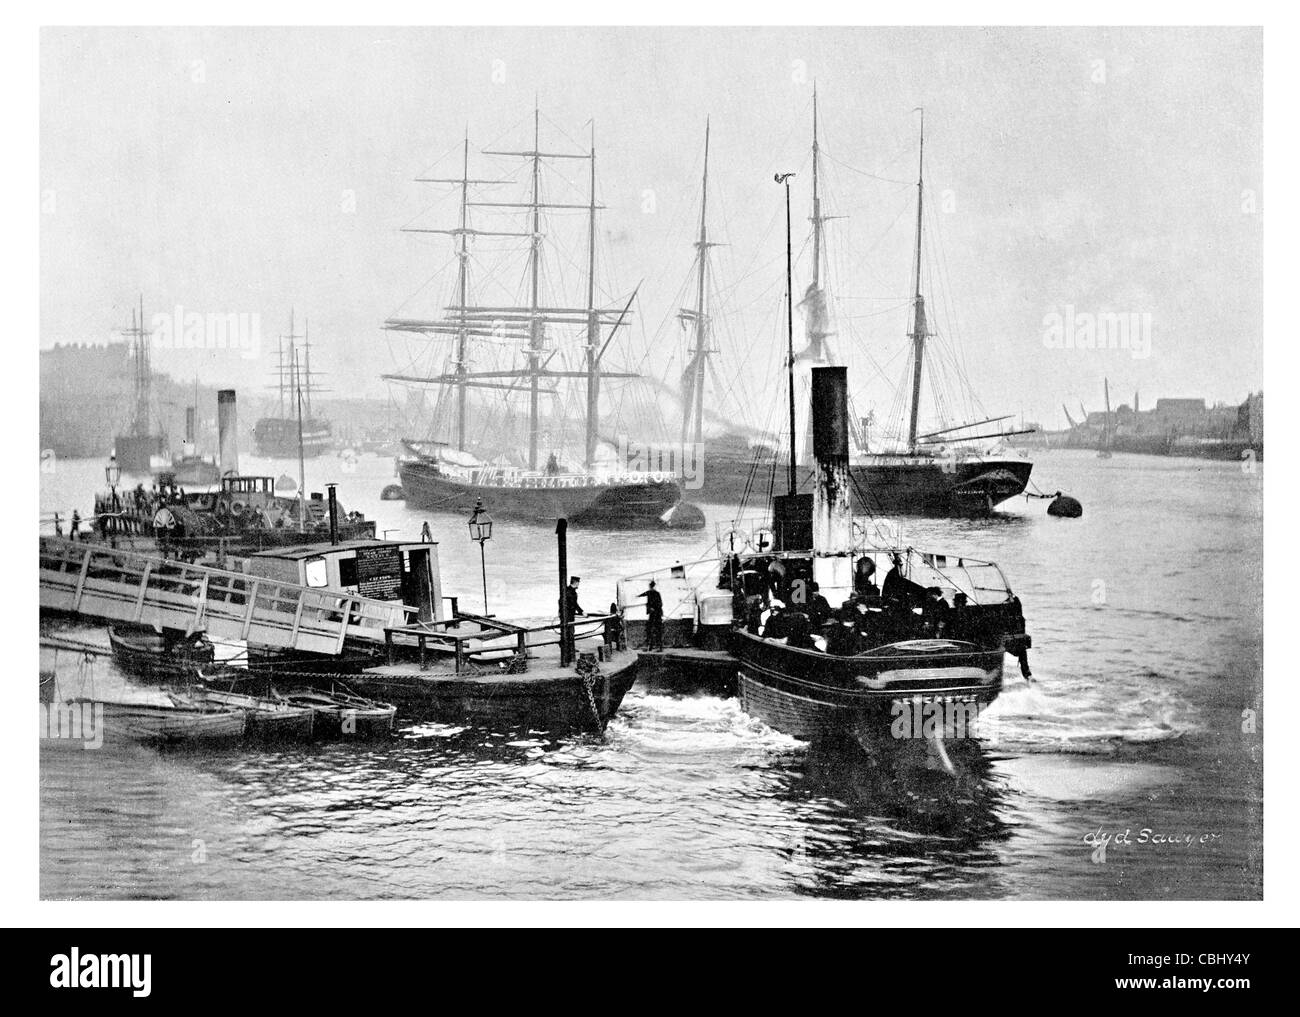 Angleterre Newcastle upon Tyne Tyne shipbuilding ship-câblages ferry terminal cargo Navire marchand Navire Navires port dock Banque D'Images